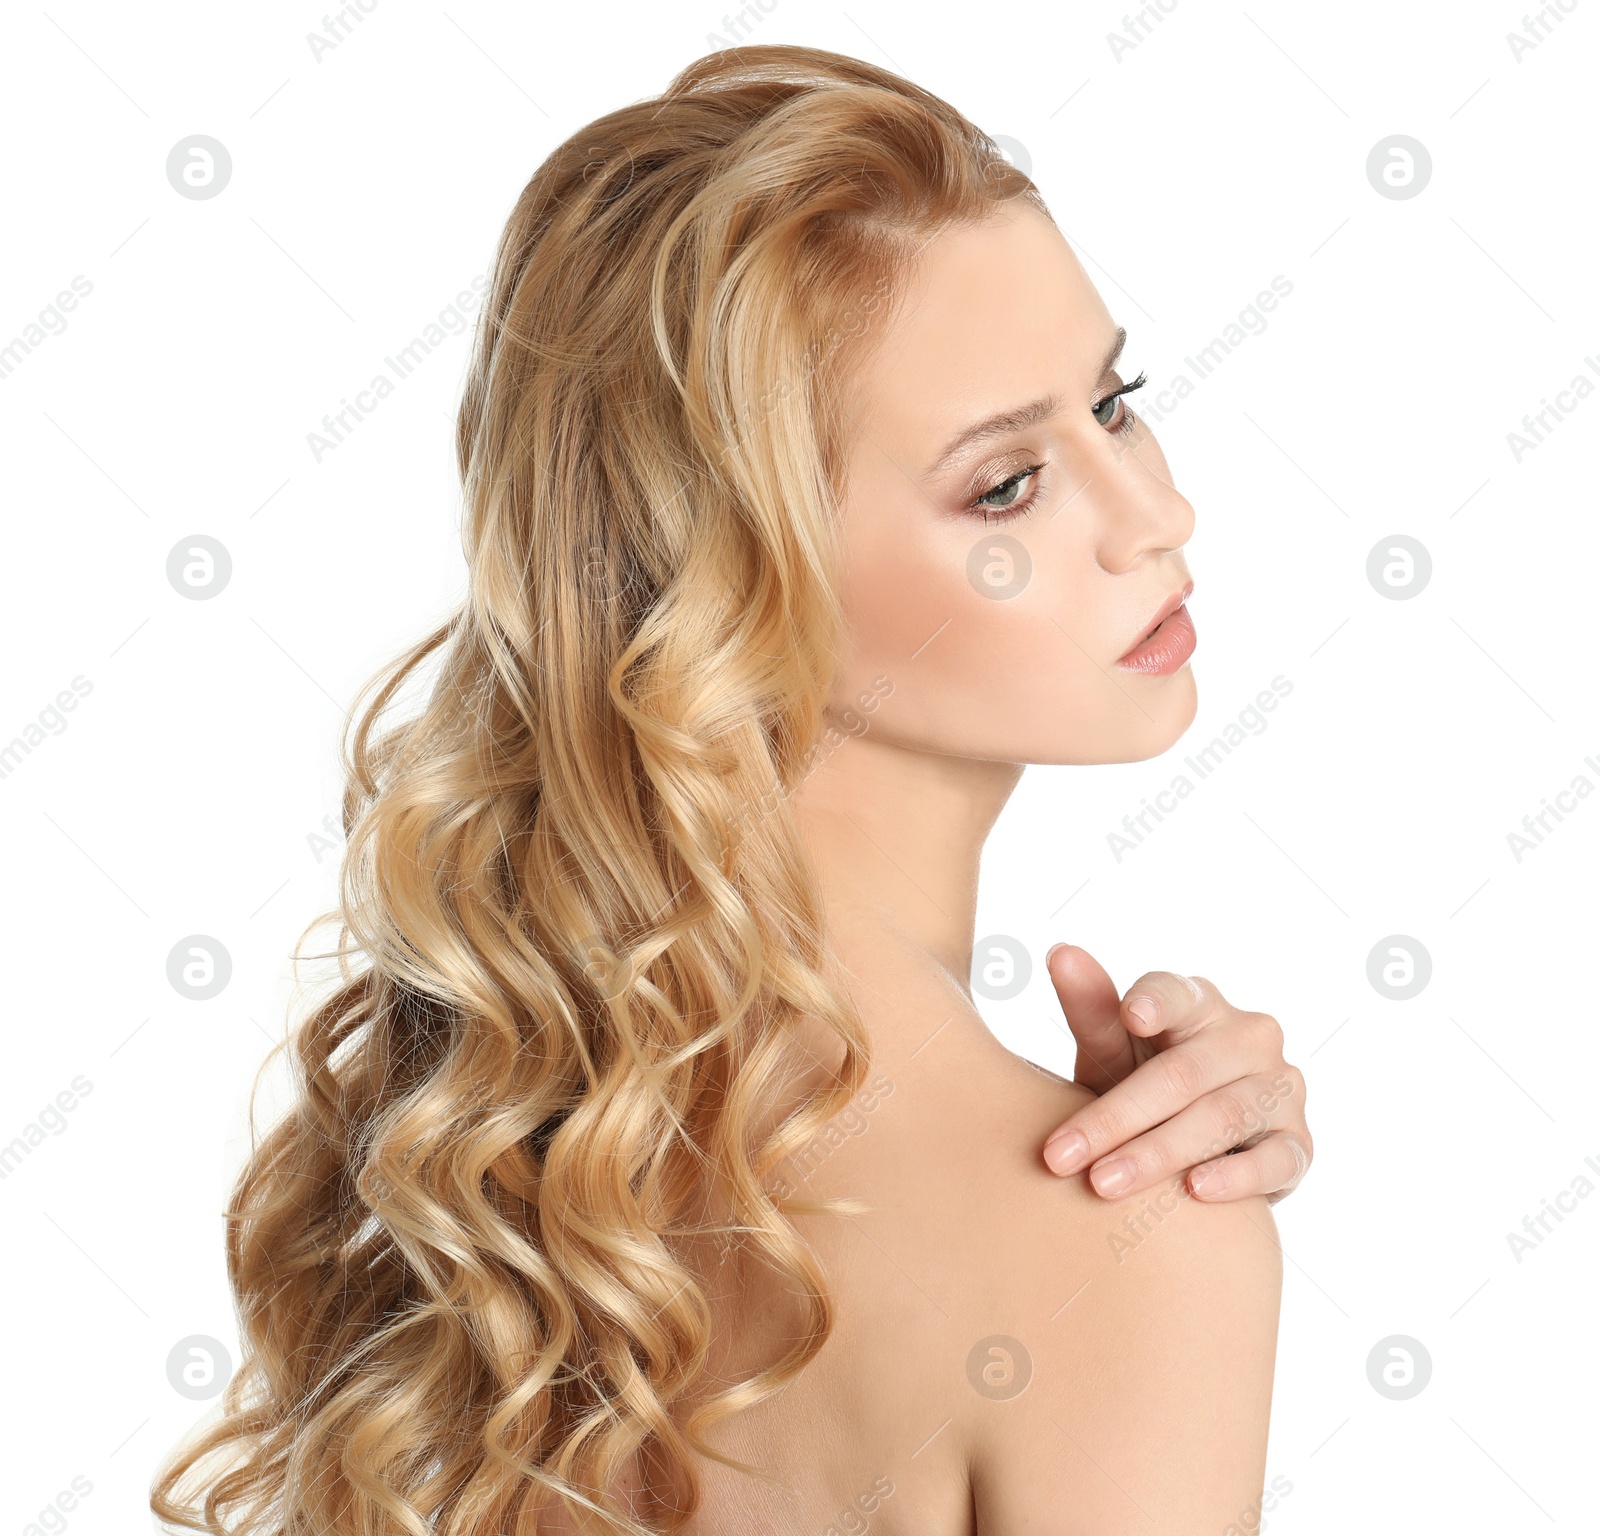 Photo of Portrait of beautiful woman with long blonde hair on white background